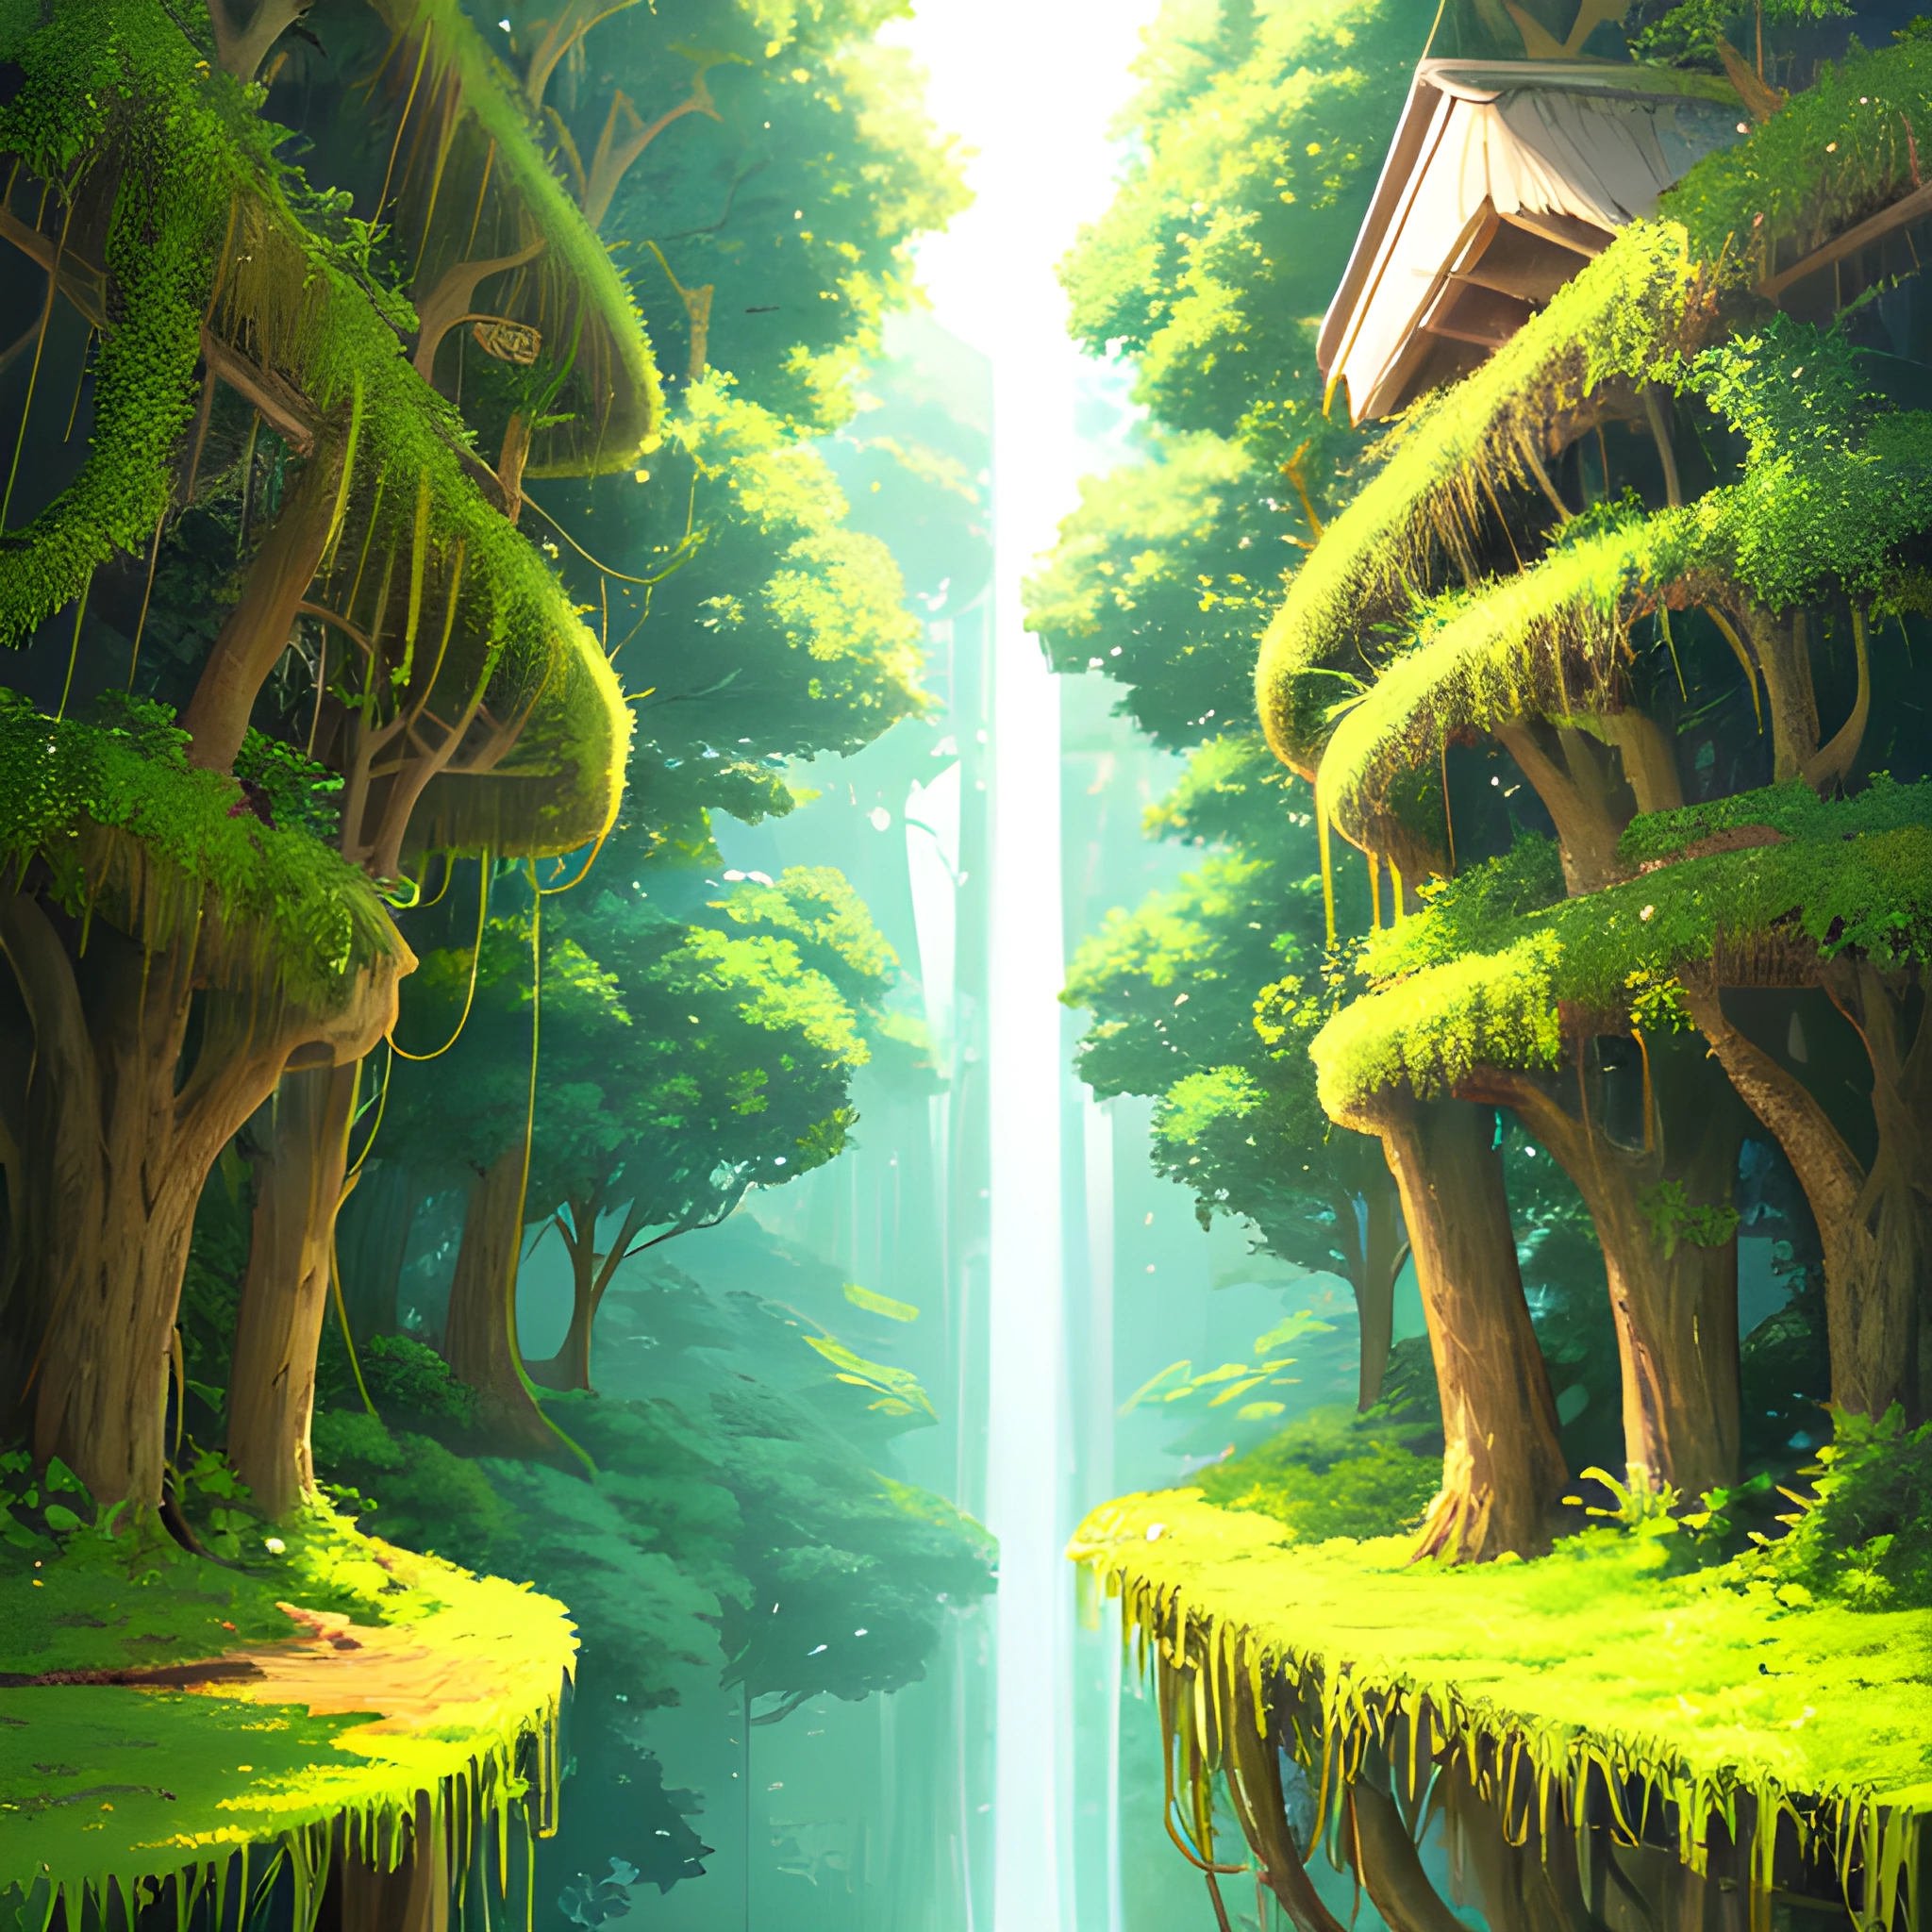 anime scenery of a waterfall and a house in a forest